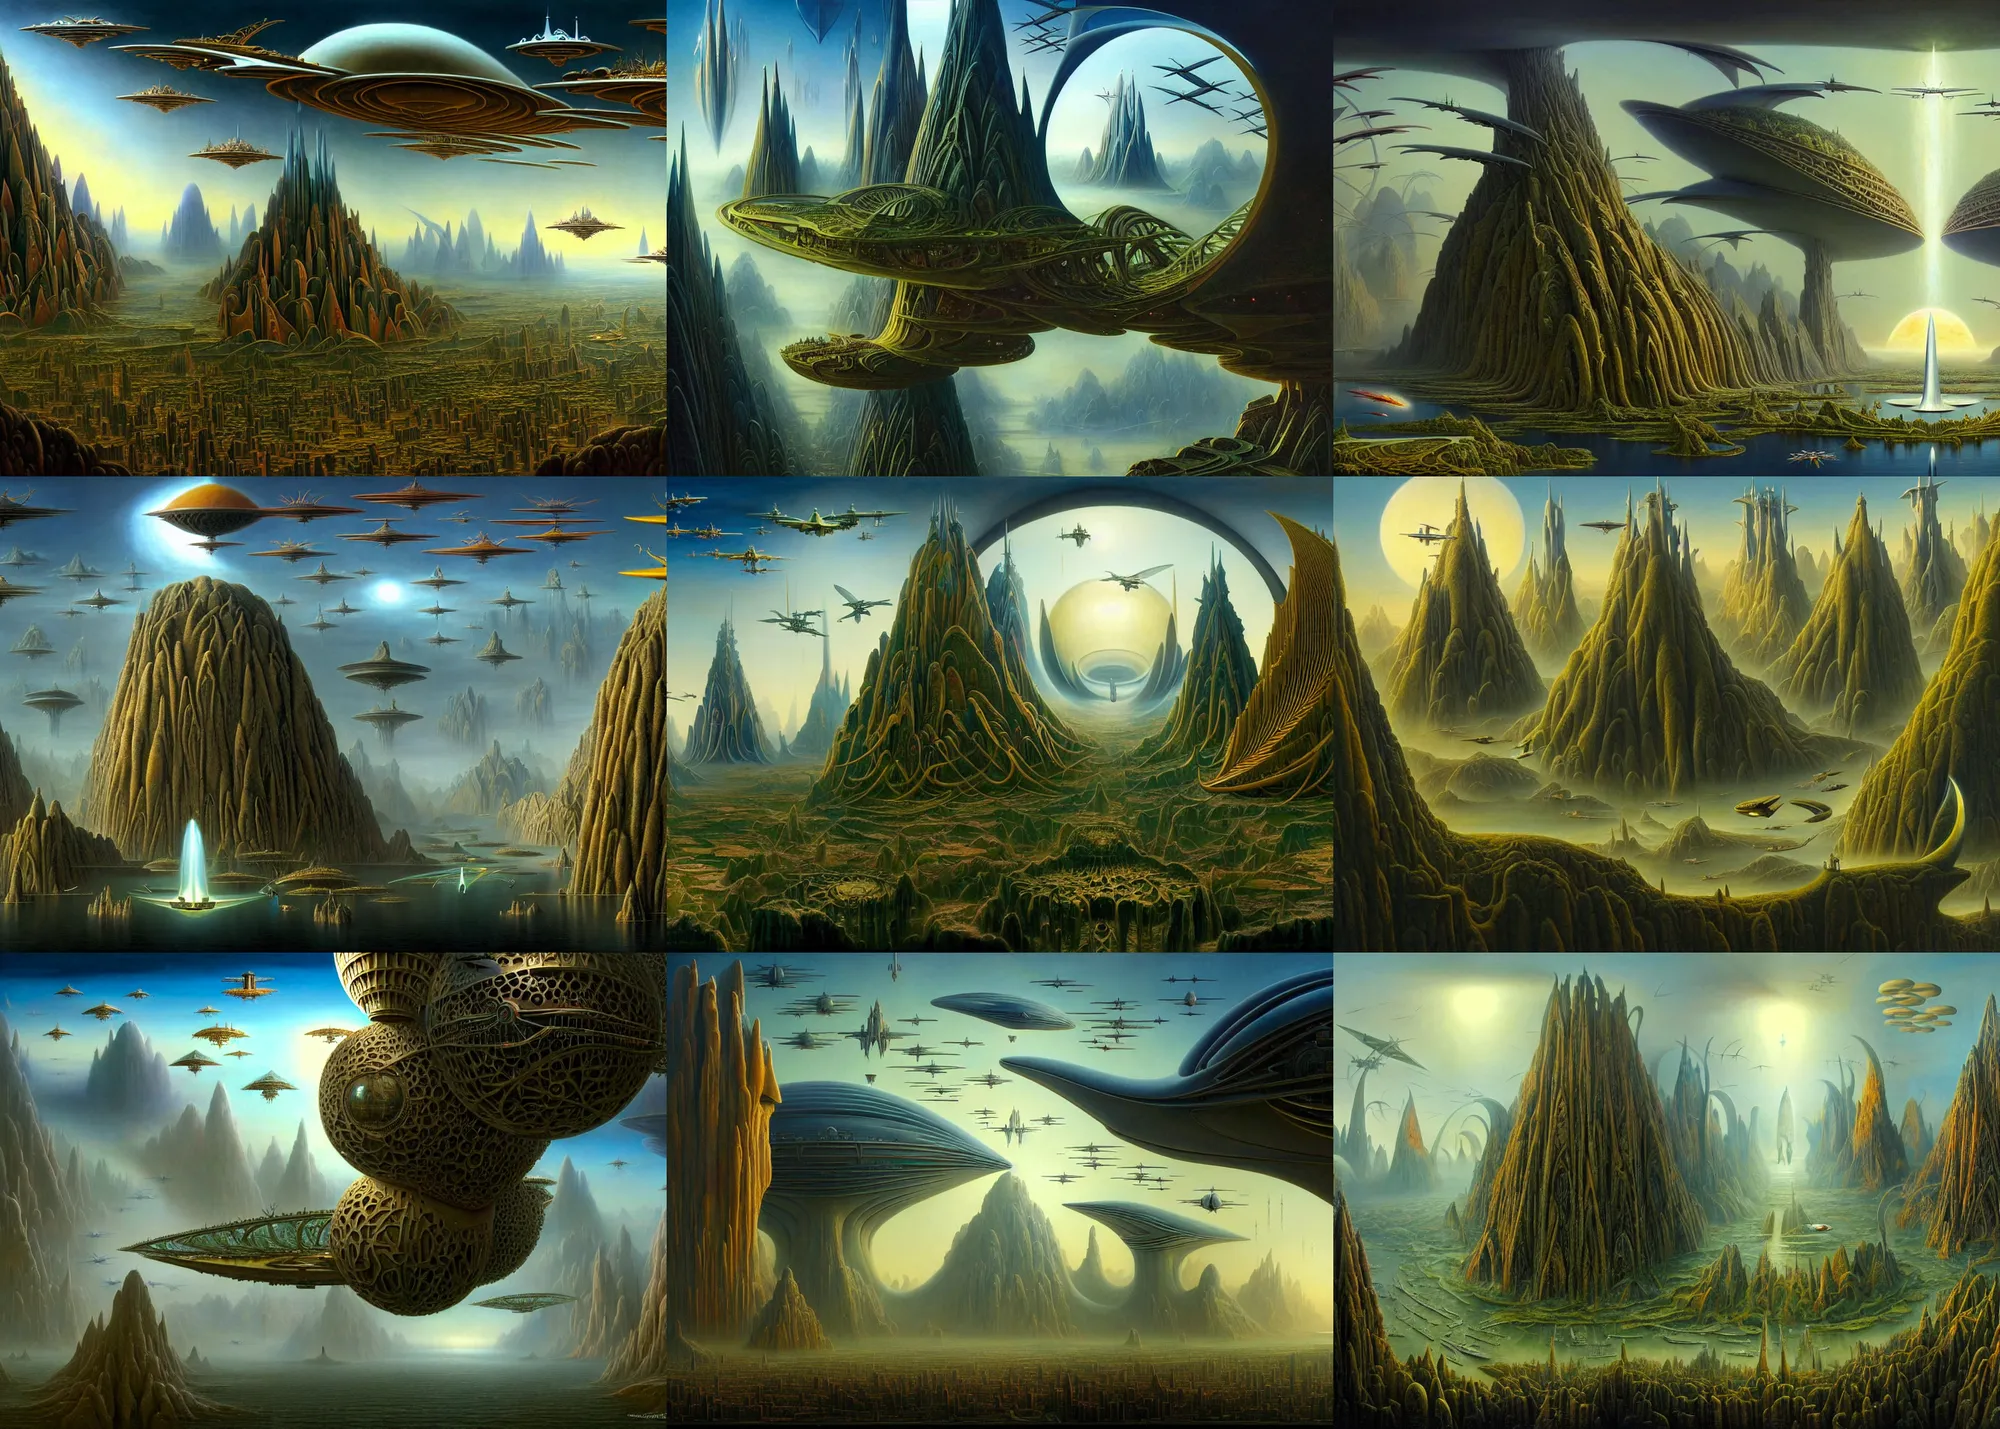 Prompt: a beautiful matte painting by Jim Burns and Noah Bradley of an advanced futuristic civilization with surreal architecture and flying machines designed by Heironymous Bosch, mega structures inspired by Heironymous Bosch's Garden of Earthly Delights, whimsical!, masterpiece!!, grand!, imaginative!!!, intricate details, sense of awe, elite, featured on artstation, award winning